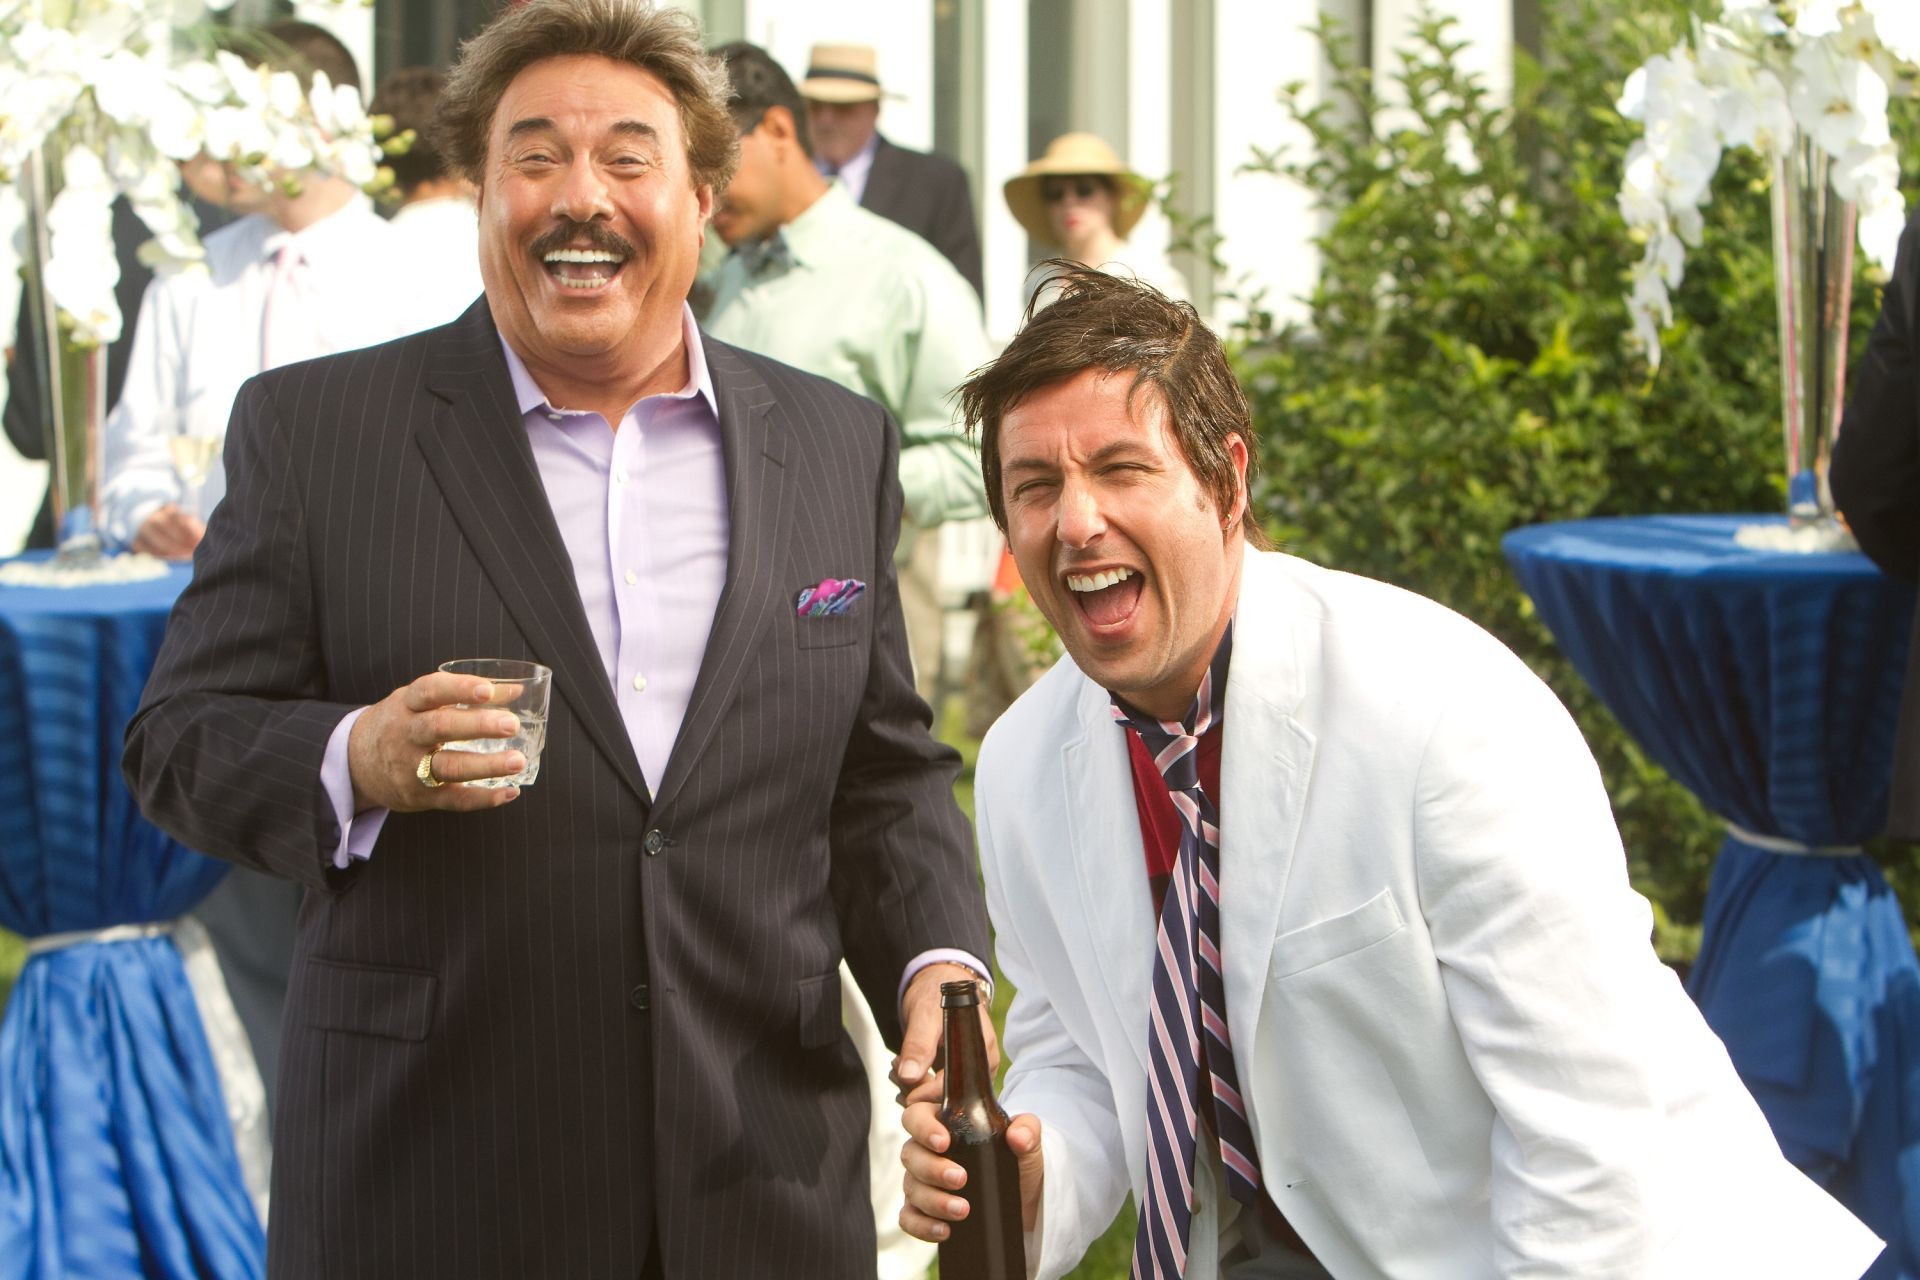 Tony Orlando stars as Steve Spirou and Adam Sandler stars as Donny Berger in Columbia Pictures' That's My Boy (2012). Photo credit by Tracy Bennett.